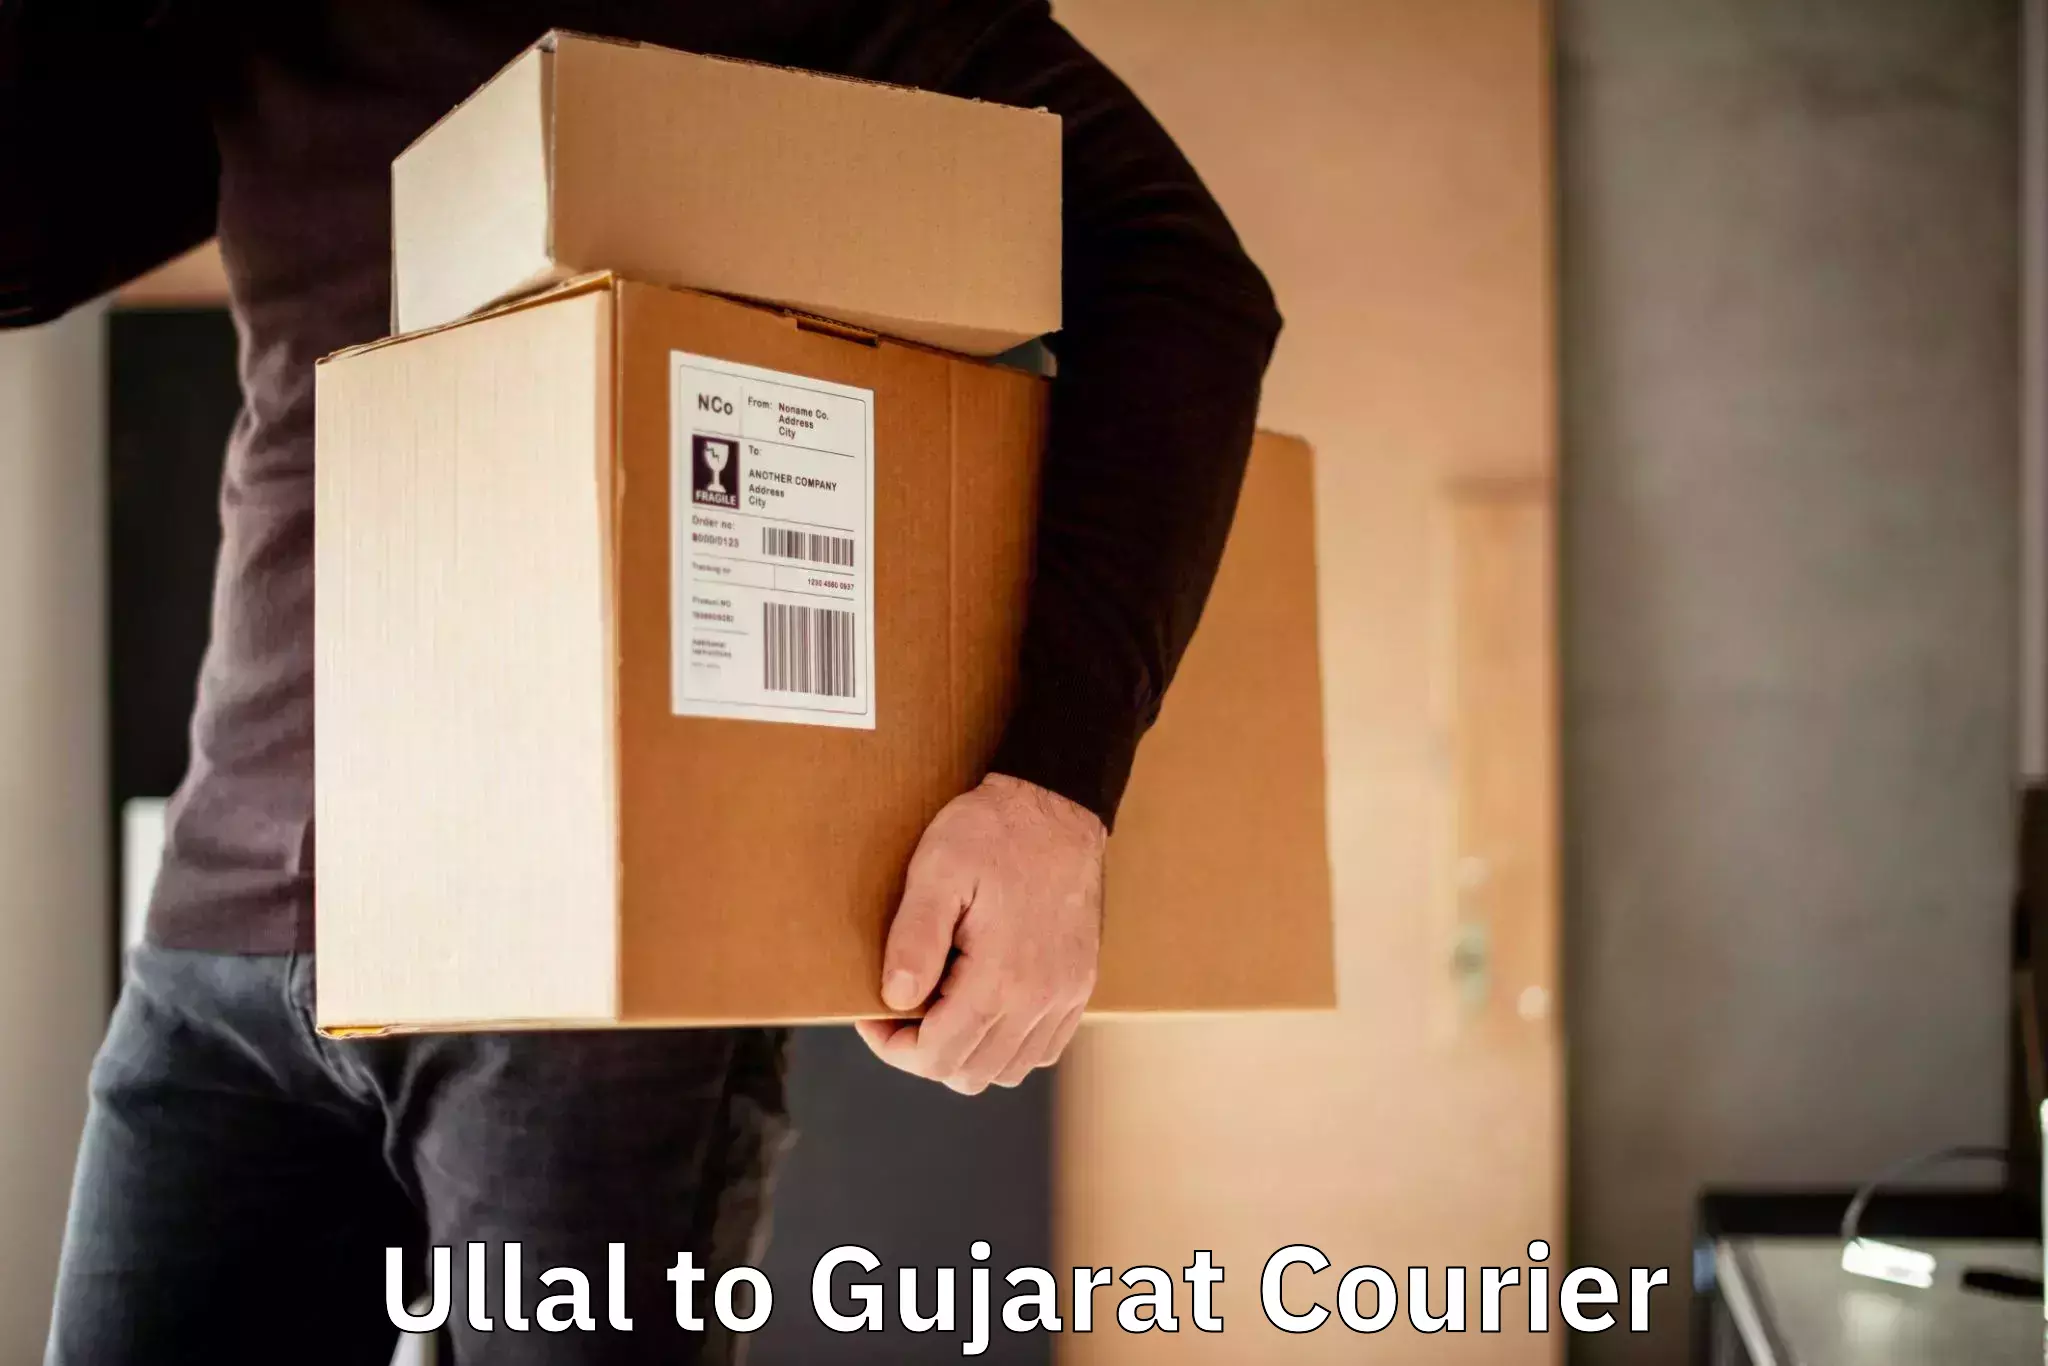 Local delivery service Ullal to Gujarat